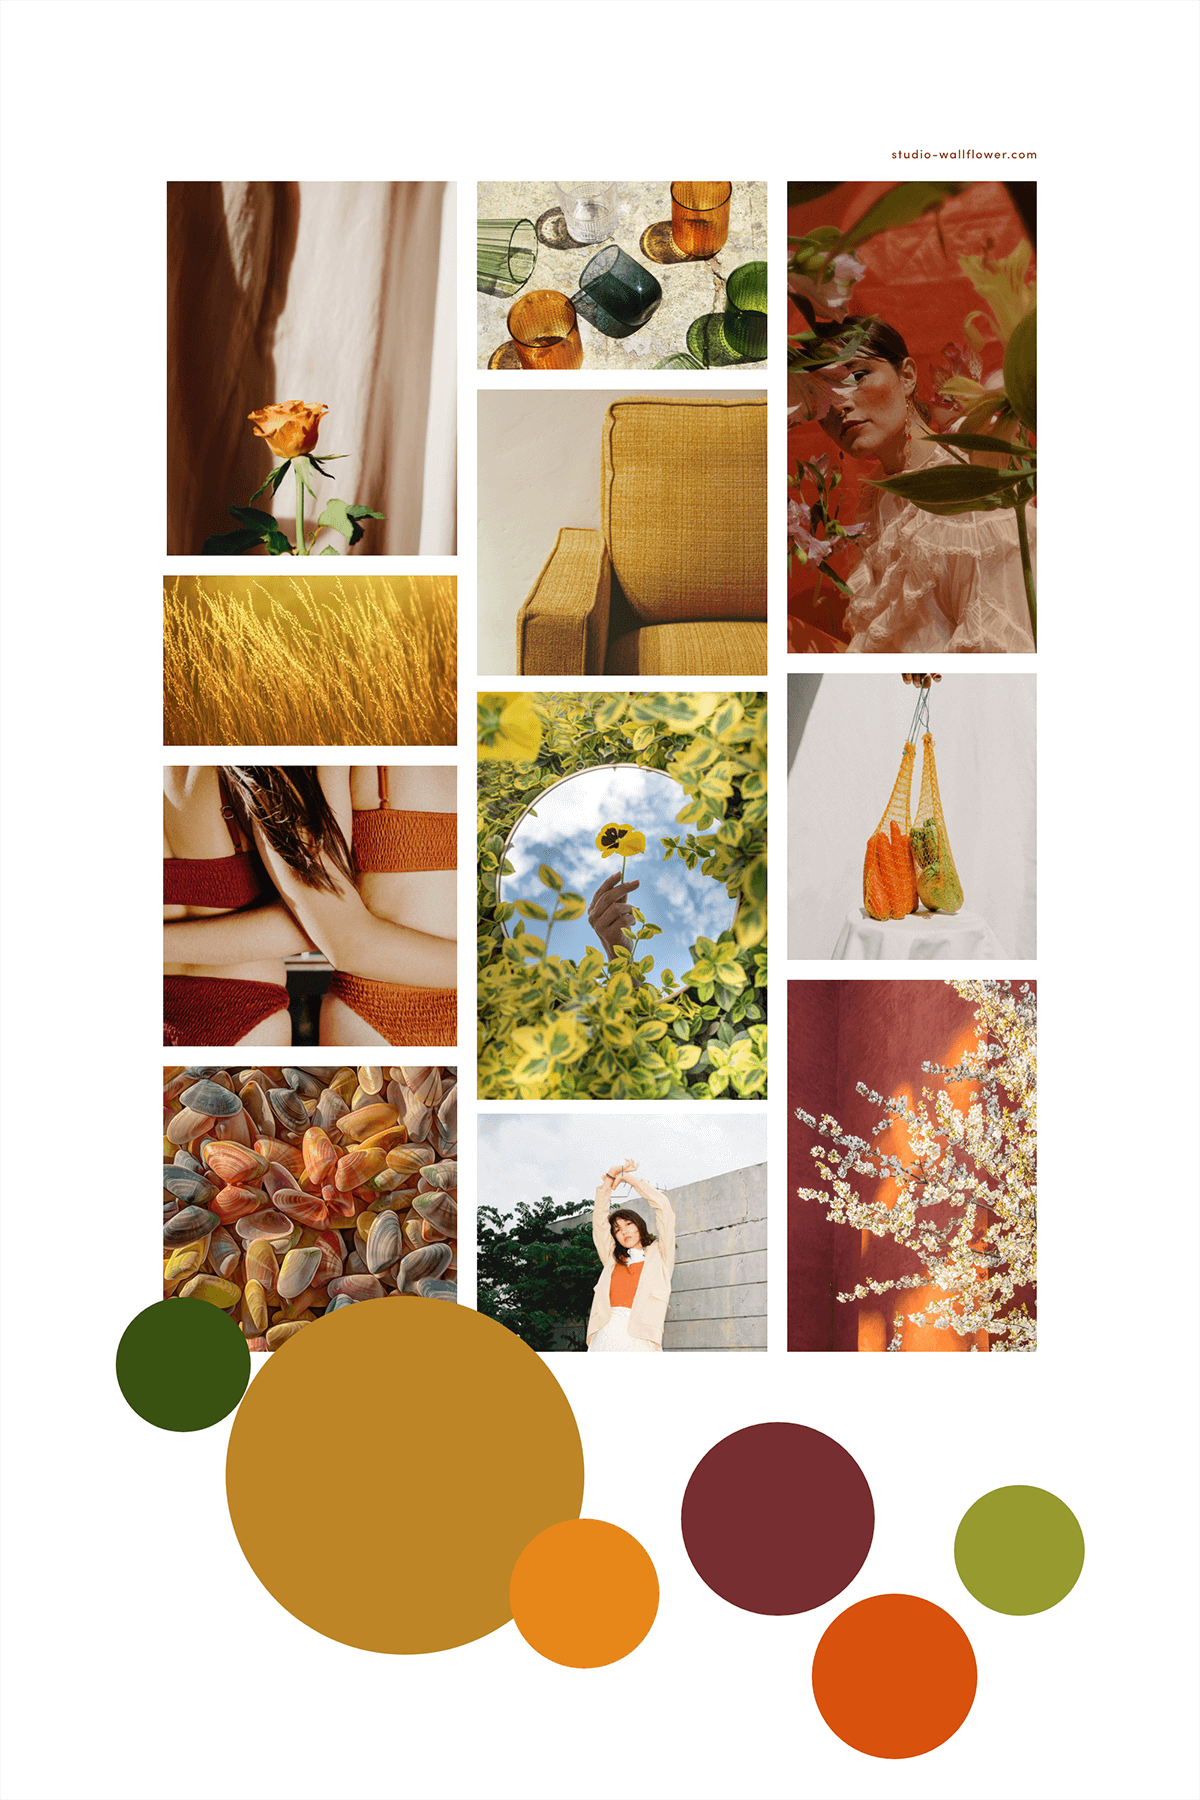 How to Make a Moodboard with Stock Photos (That Actually Looks Good)